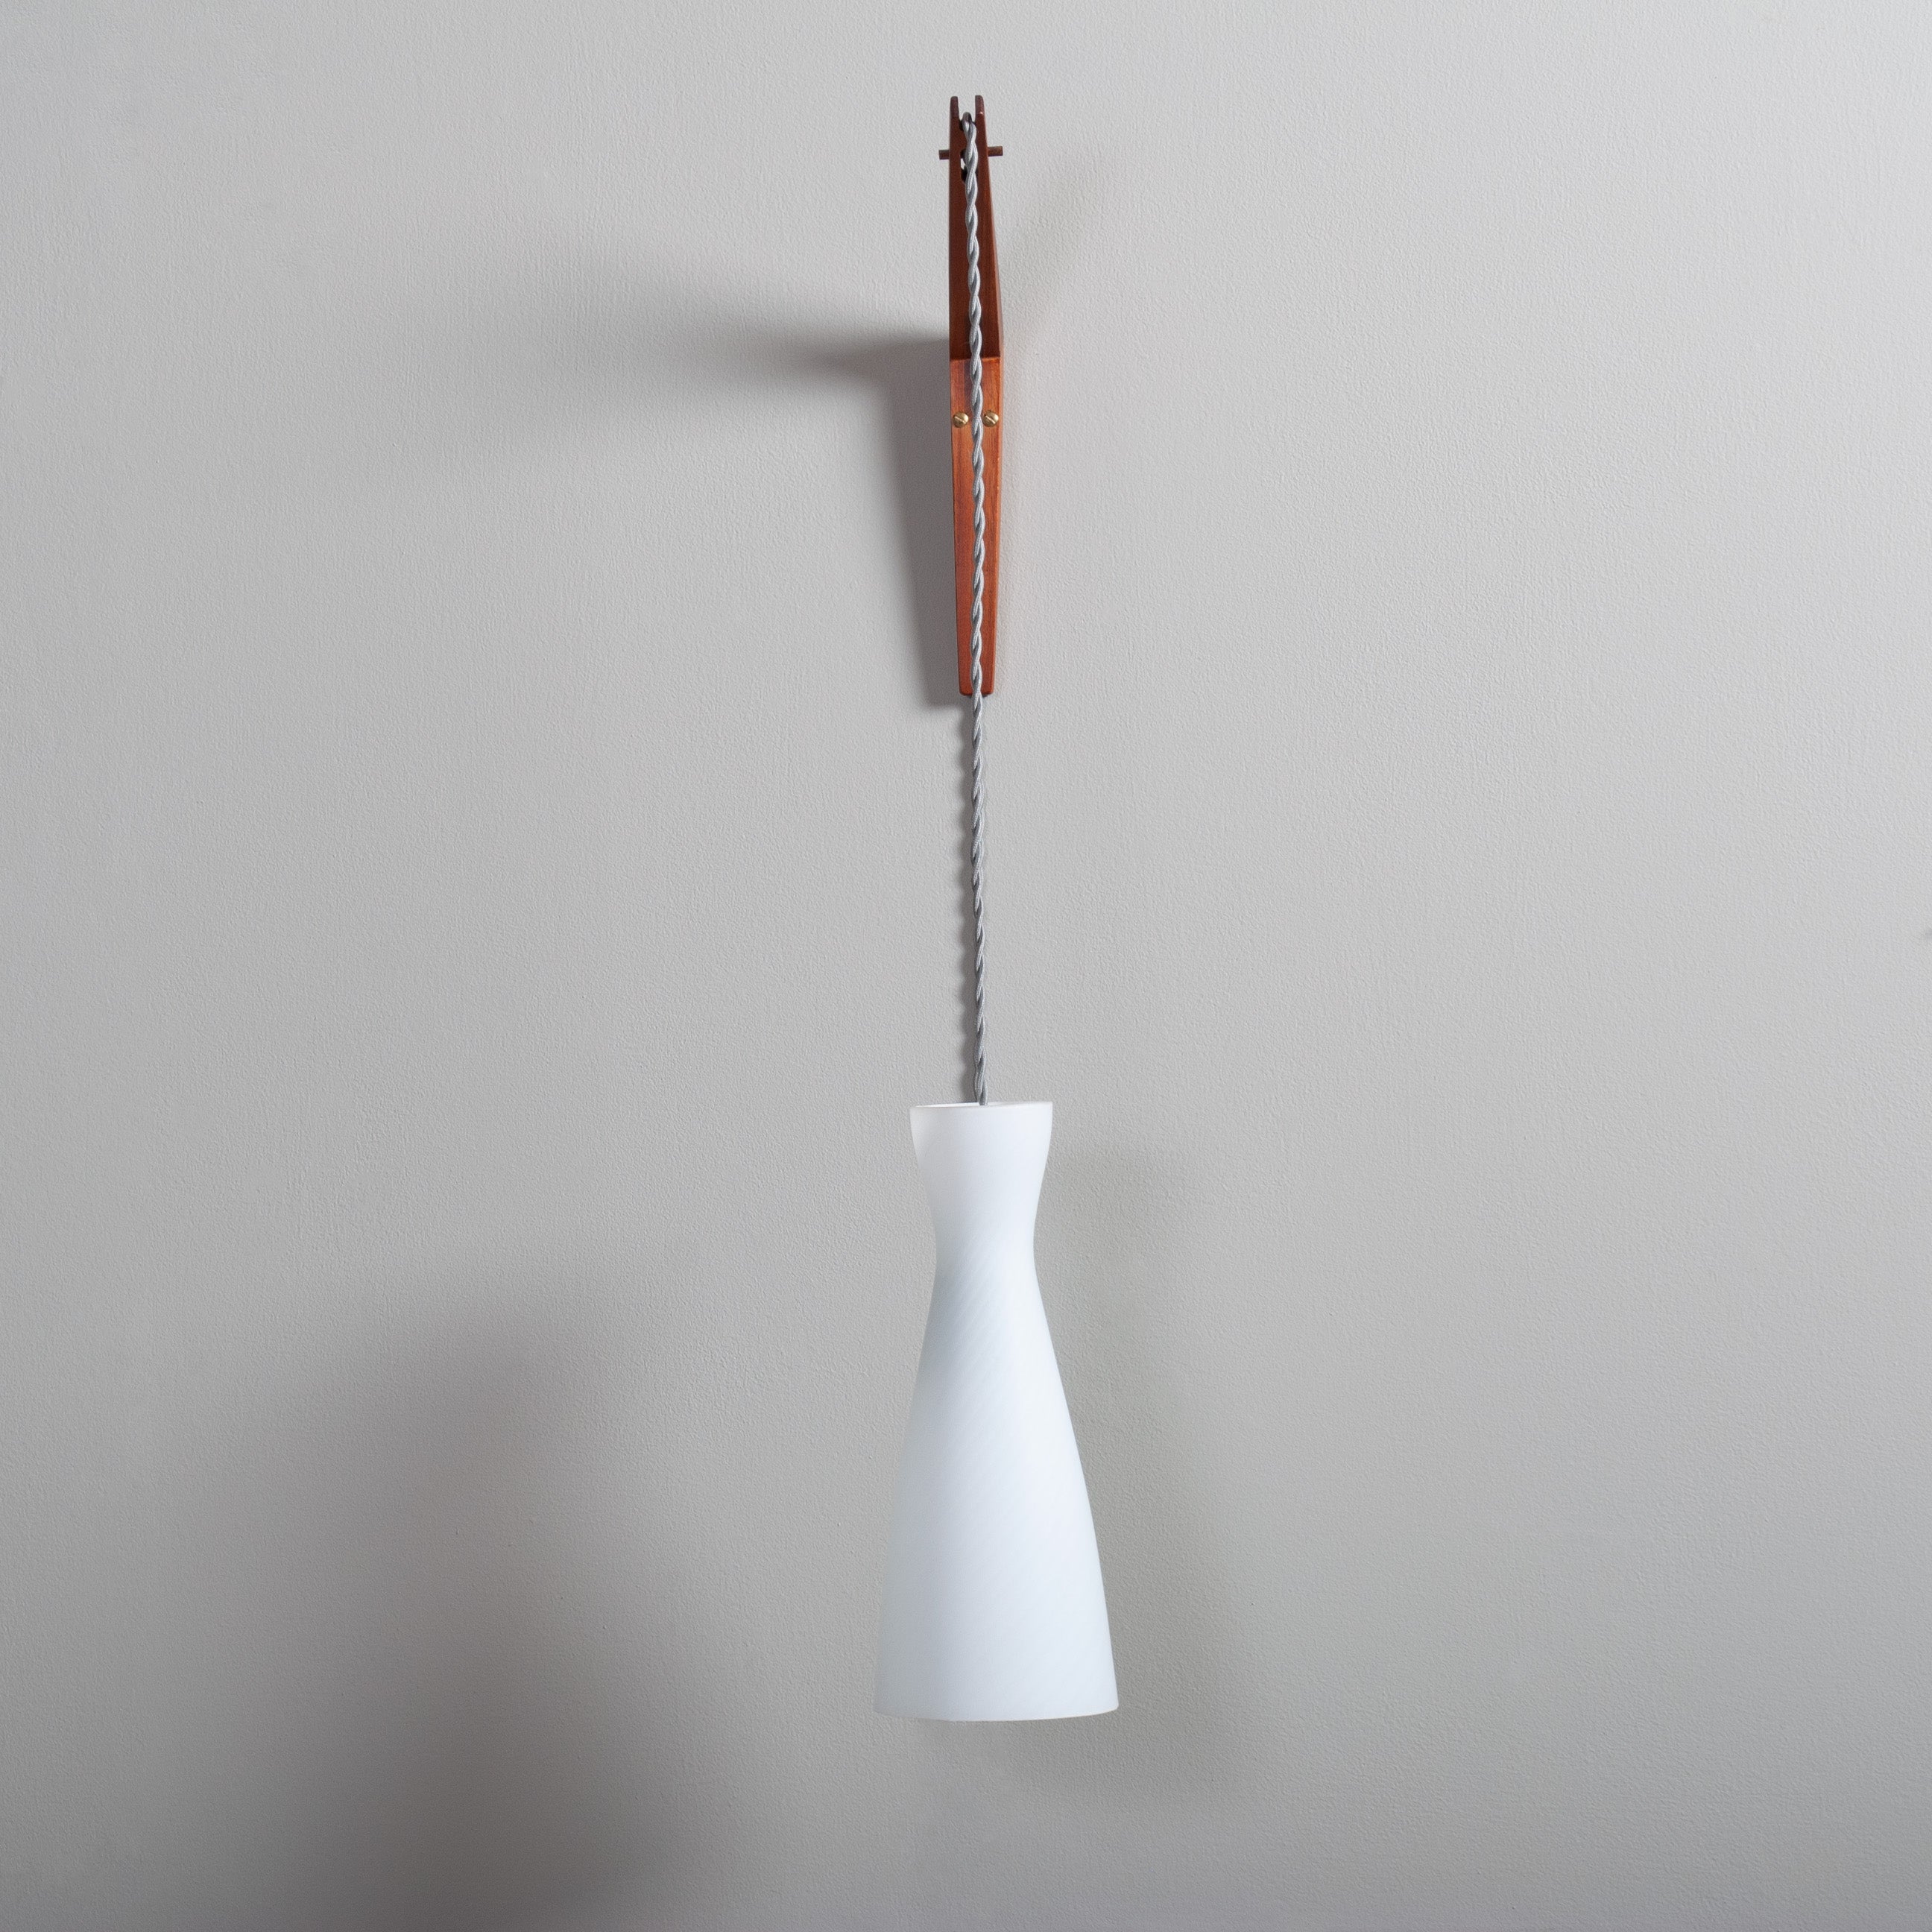 This Modernist wall lamp can be either hardwired into an existing wall circuit or cable with inline switch to plug. Whichever, its a very slick design. Produced in Denmark circa 1960 and made from teak and glass. 
The cable winds through the teak